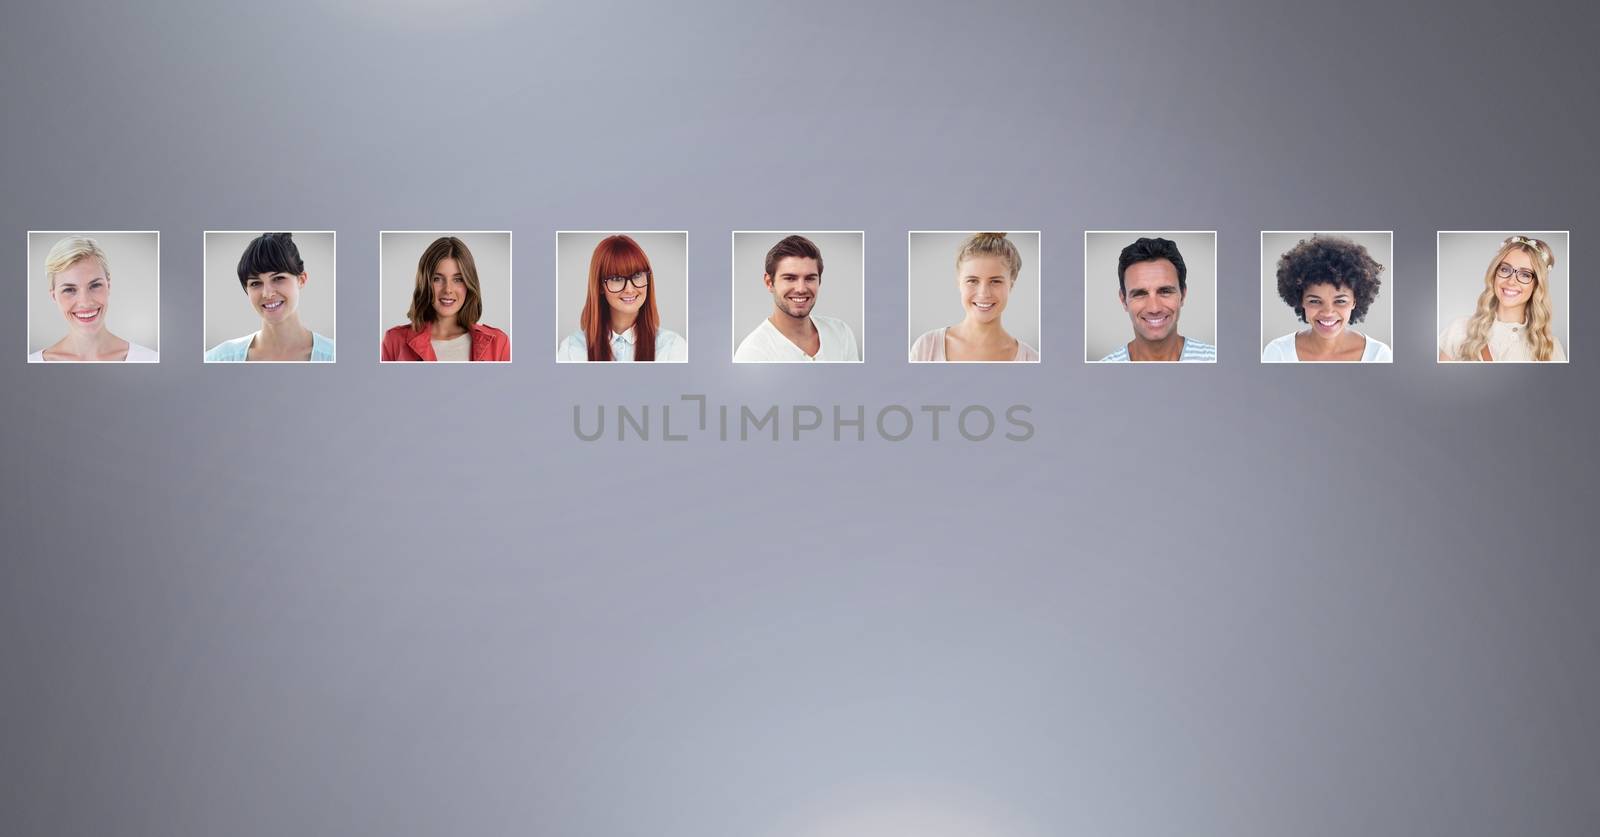 portrait profiles of different people by Wavebreakmedia